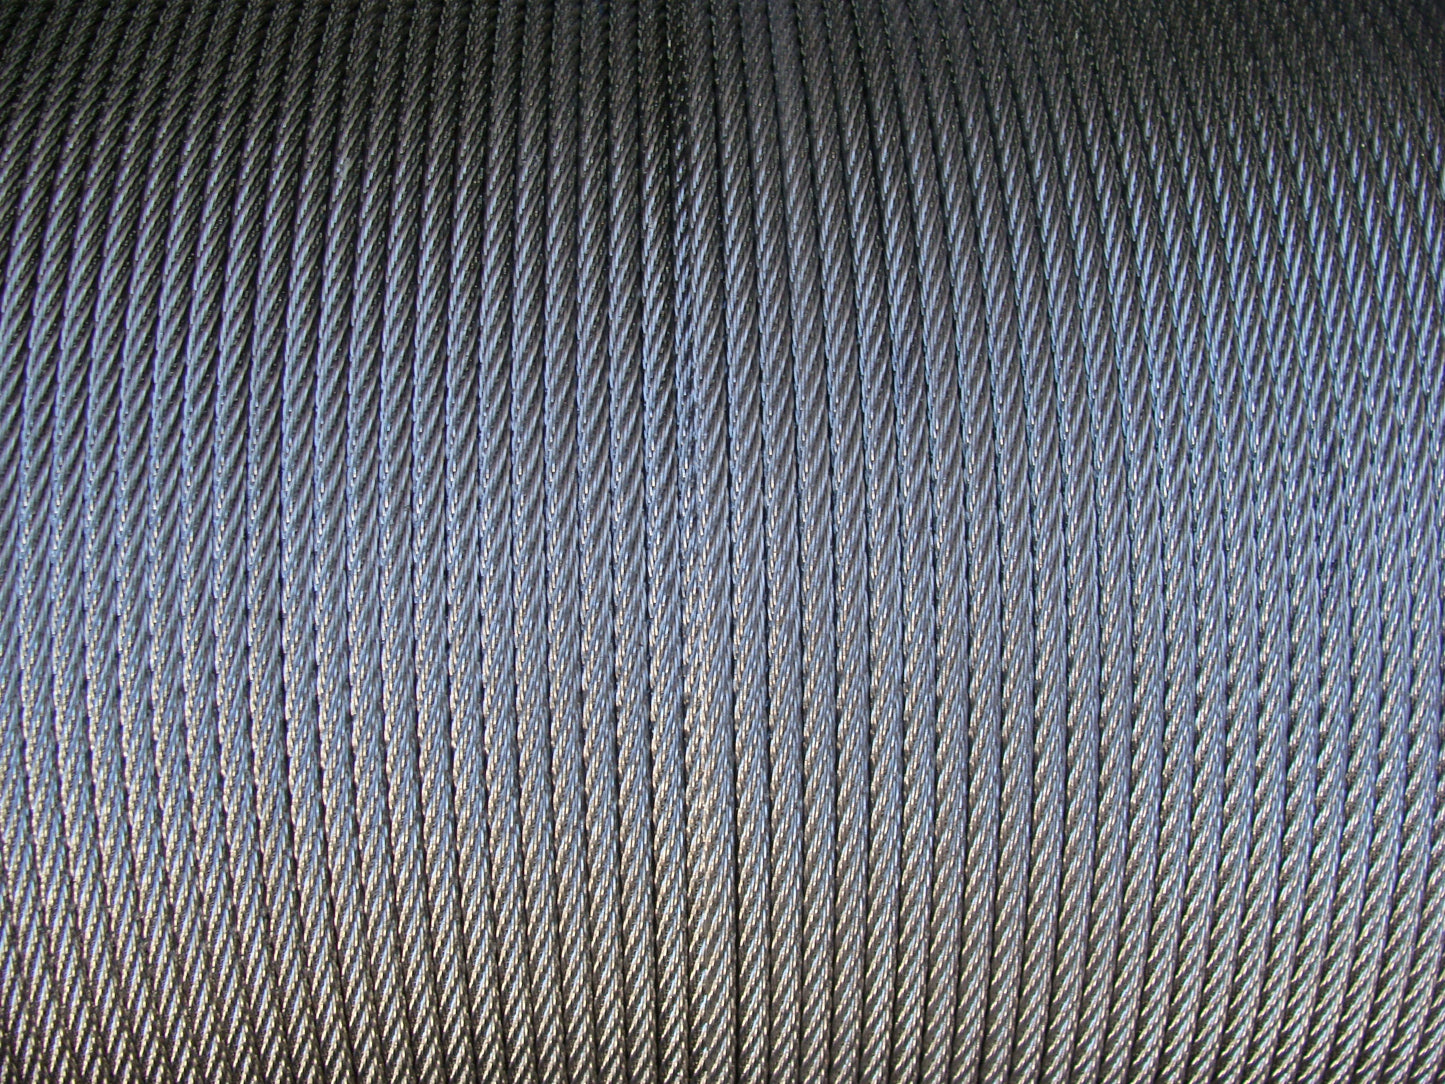 4mm 7x7 Semi Flexible Stainless Steel Cable